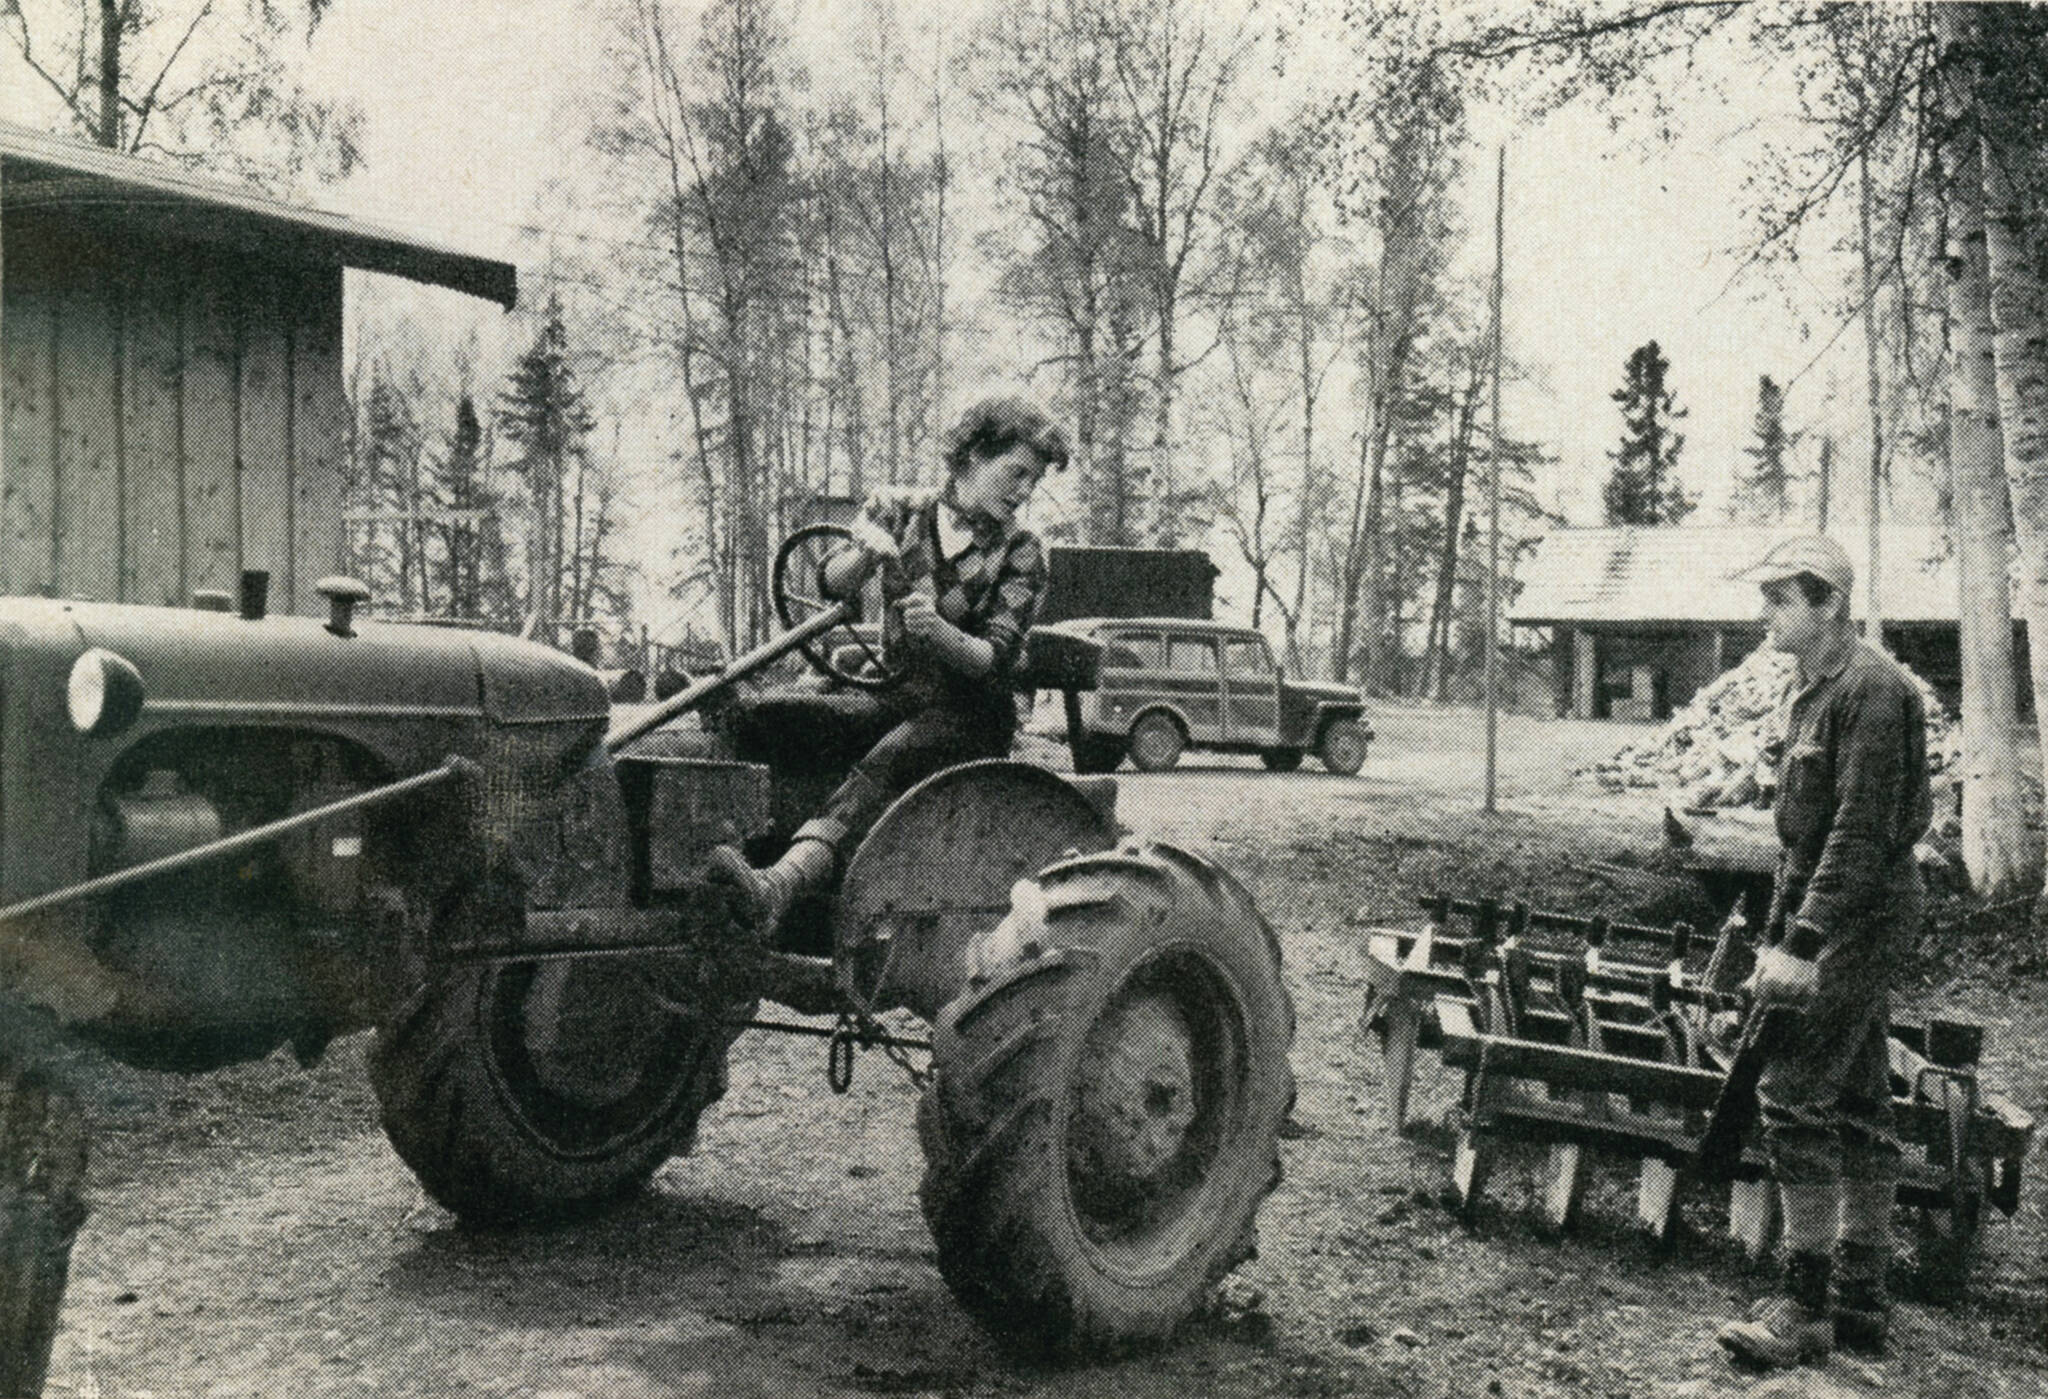 1954 photo by Bob and Ira Spring for Better Homes & Garden magazine
Rusty Lancashire backs up the family tractor so her husband Larry can connect it to the disc for their fields.